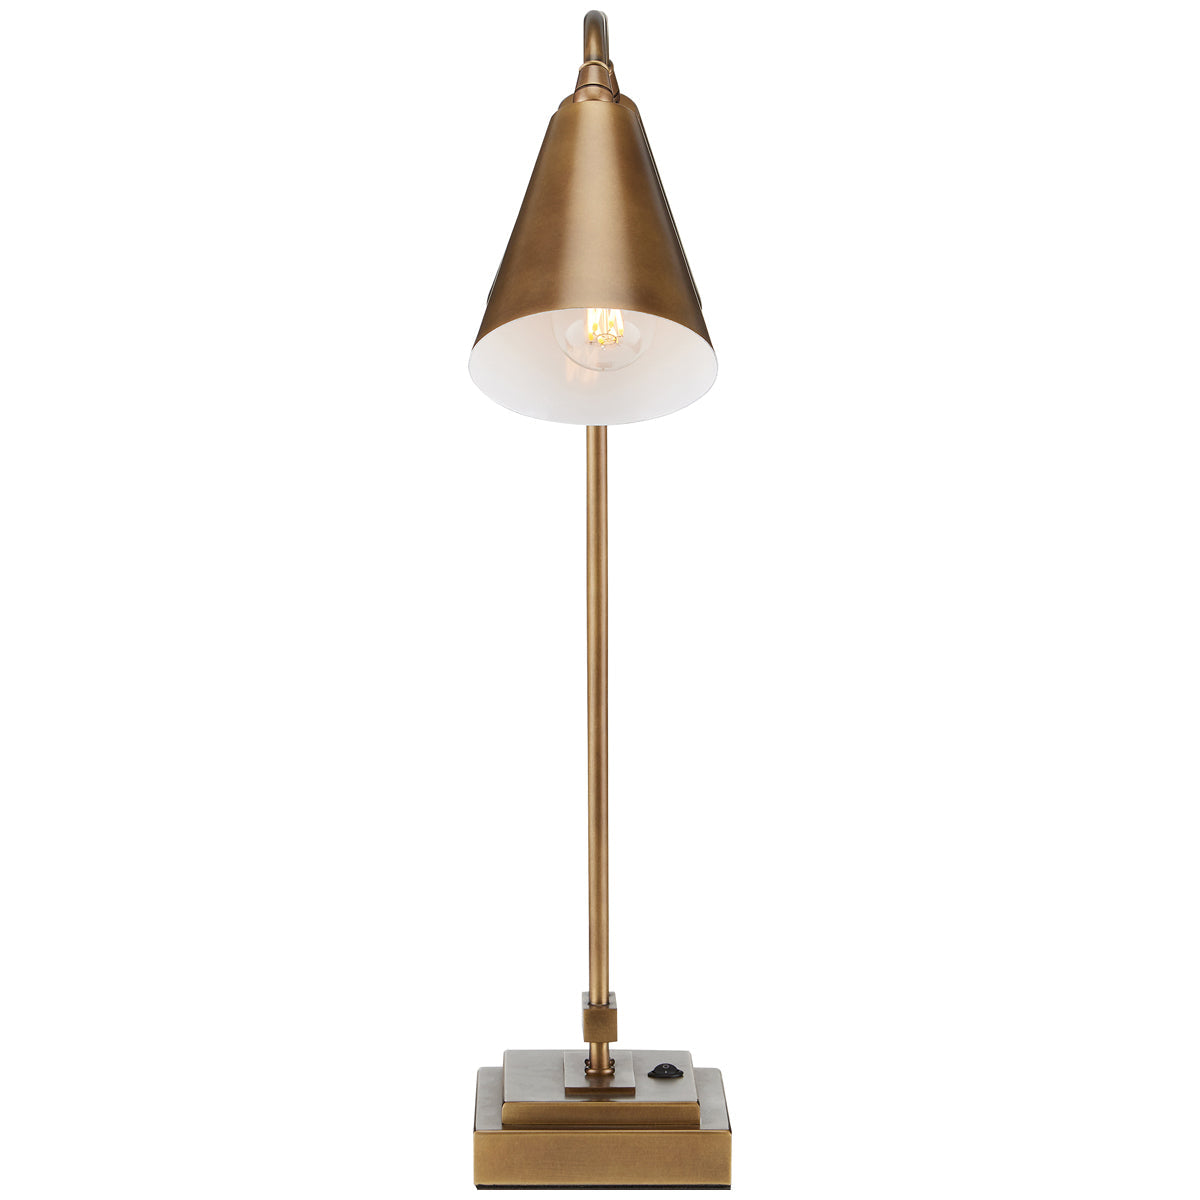 Currey and Company Symmetry Double Desk Lamp